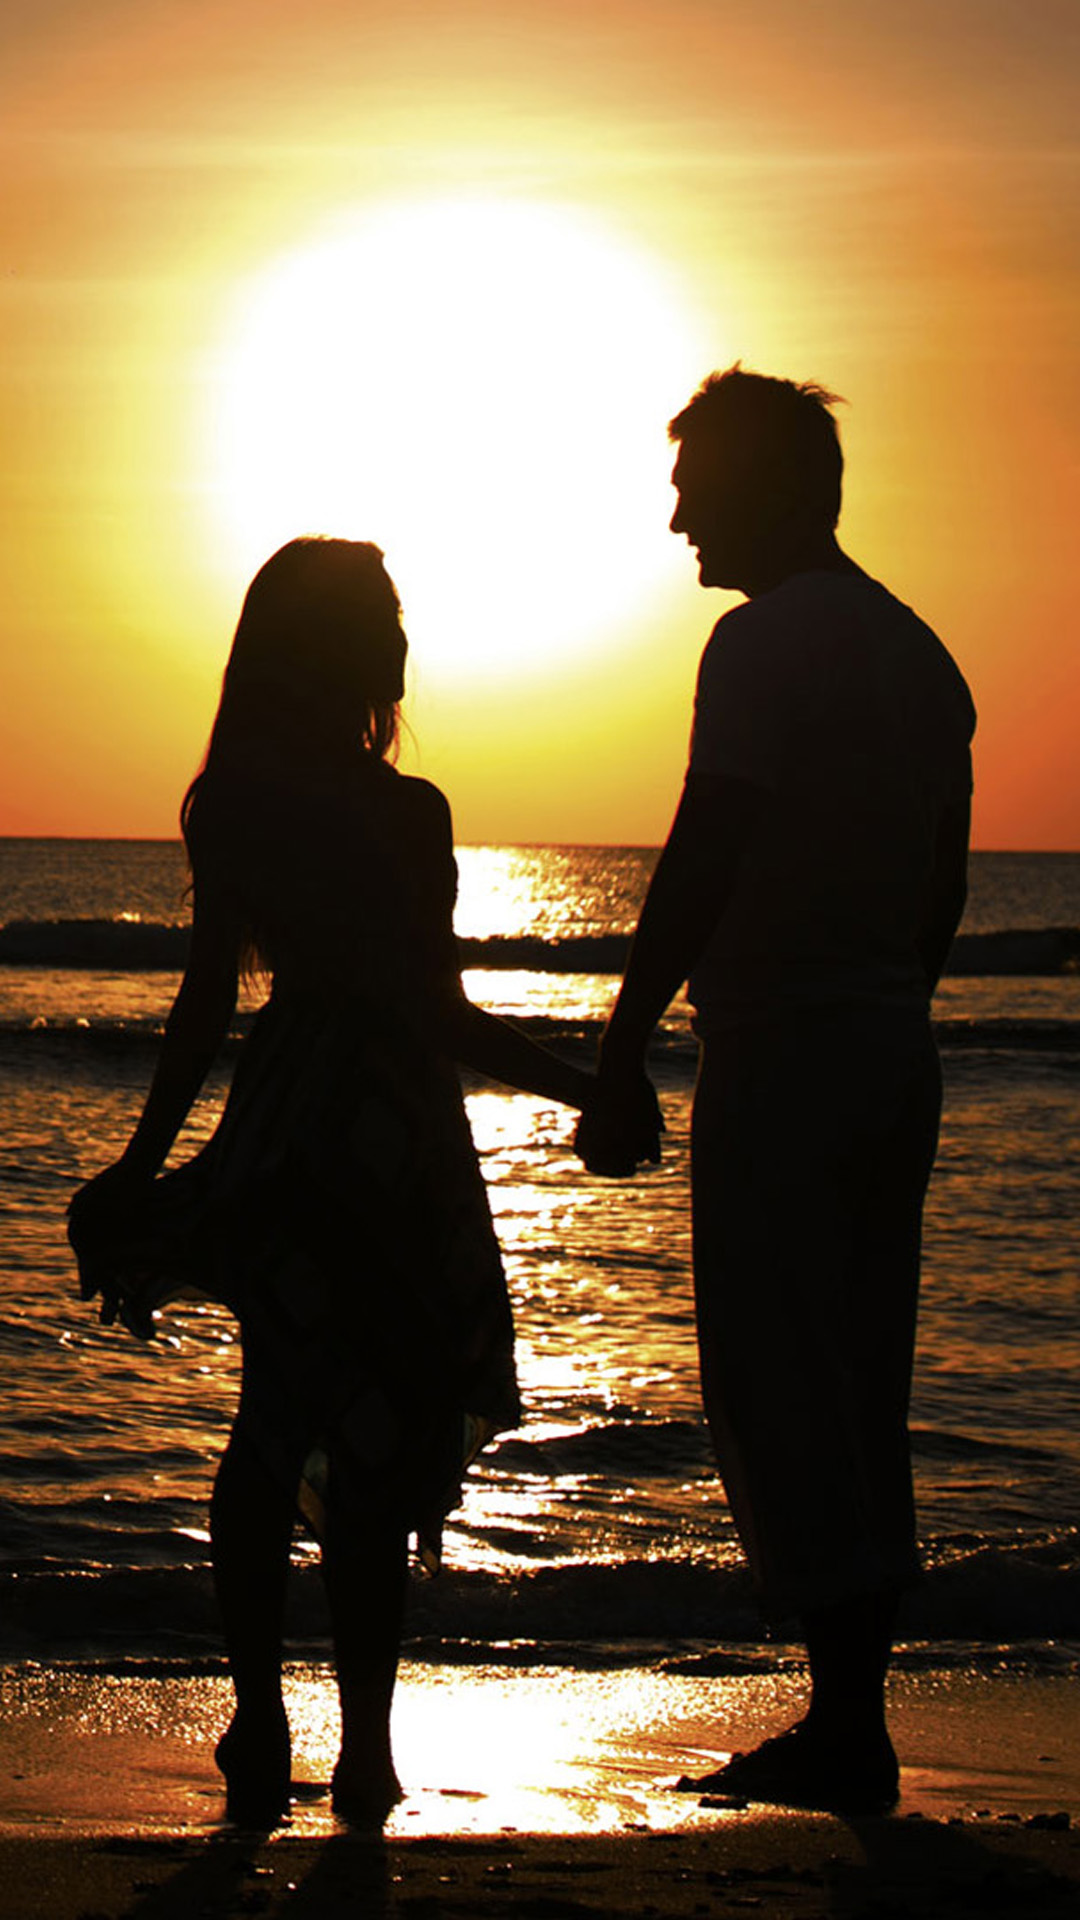 Sunset Beach Couple Android Wallpaper - Hd Couples Wallpapers For Android - HD Wallpaper 